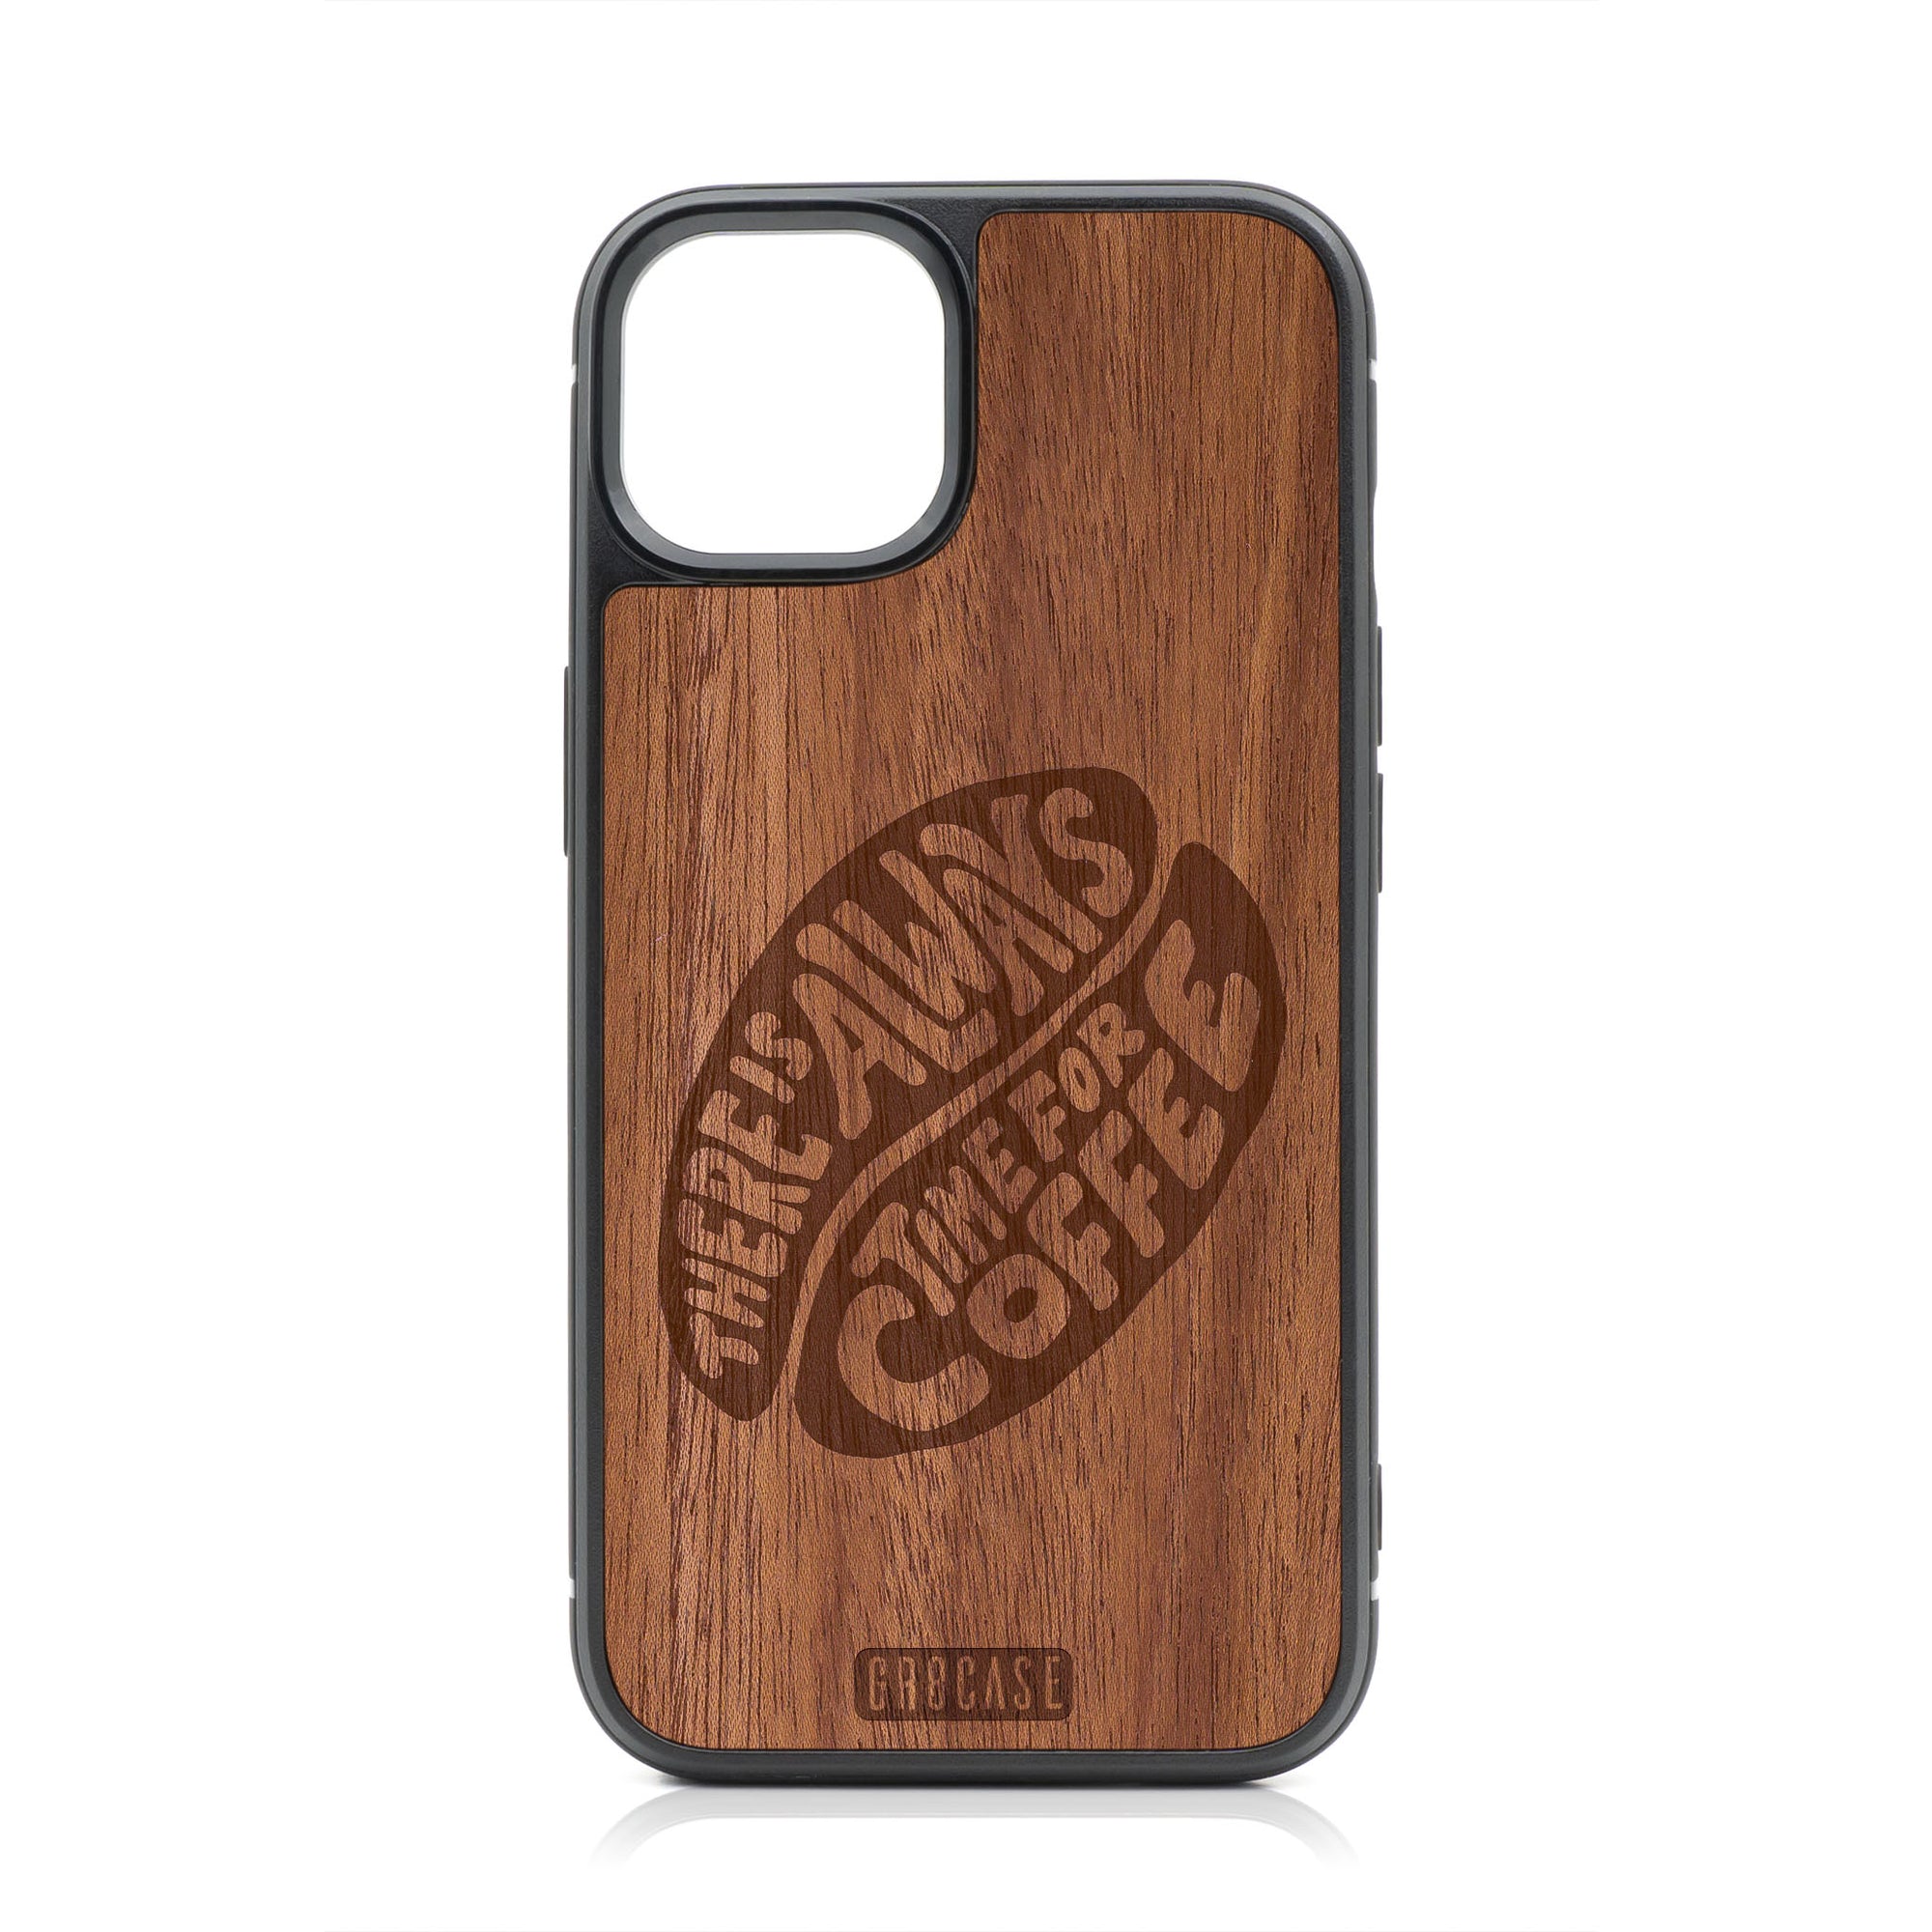 There Is Always Time For Coffee Design Wood Case For iPhone 13